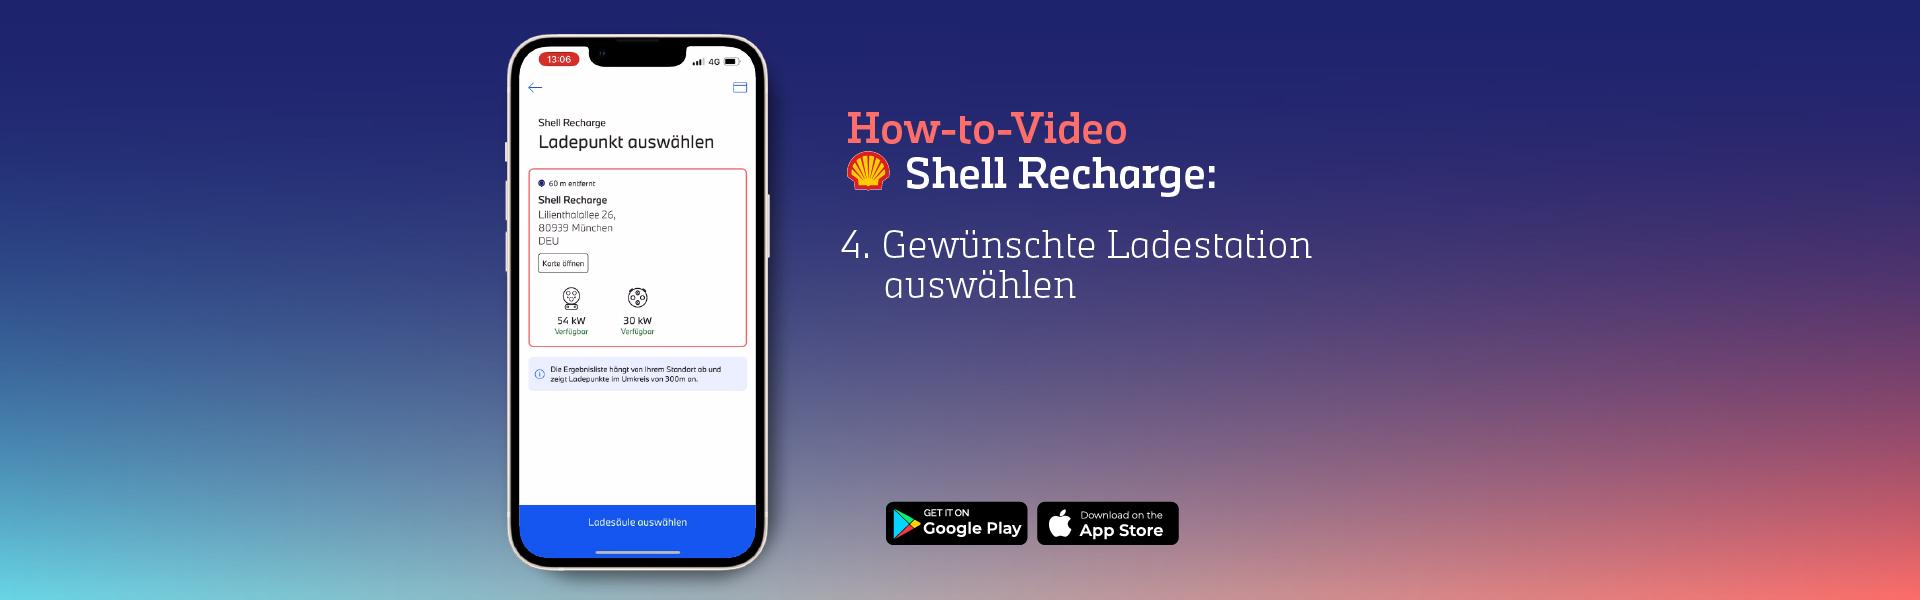 How-to-Video_Shell_recharge